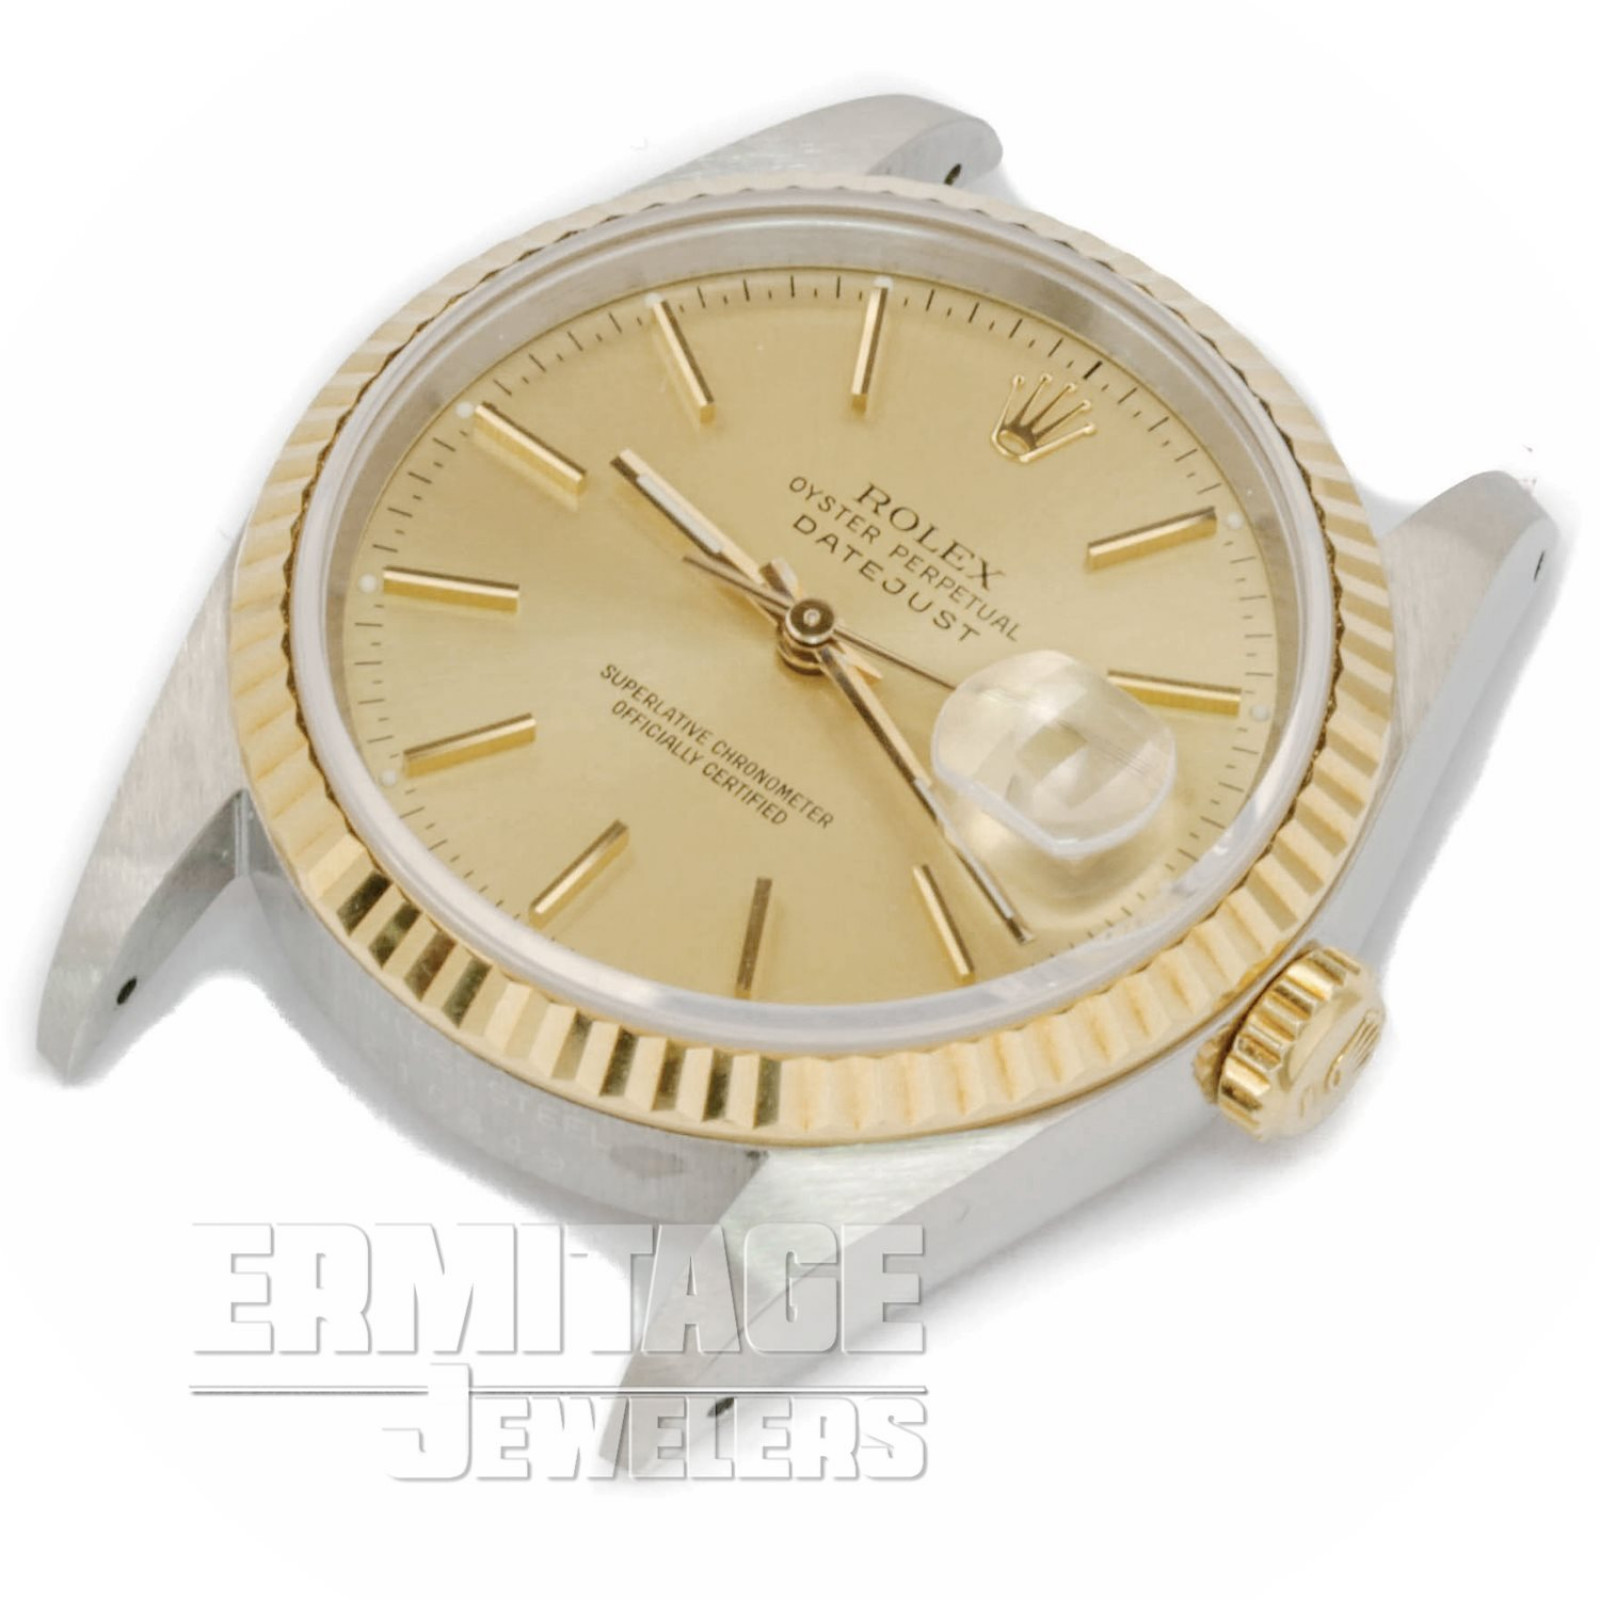 Rolex Datejust 16233 with Champagne Dial